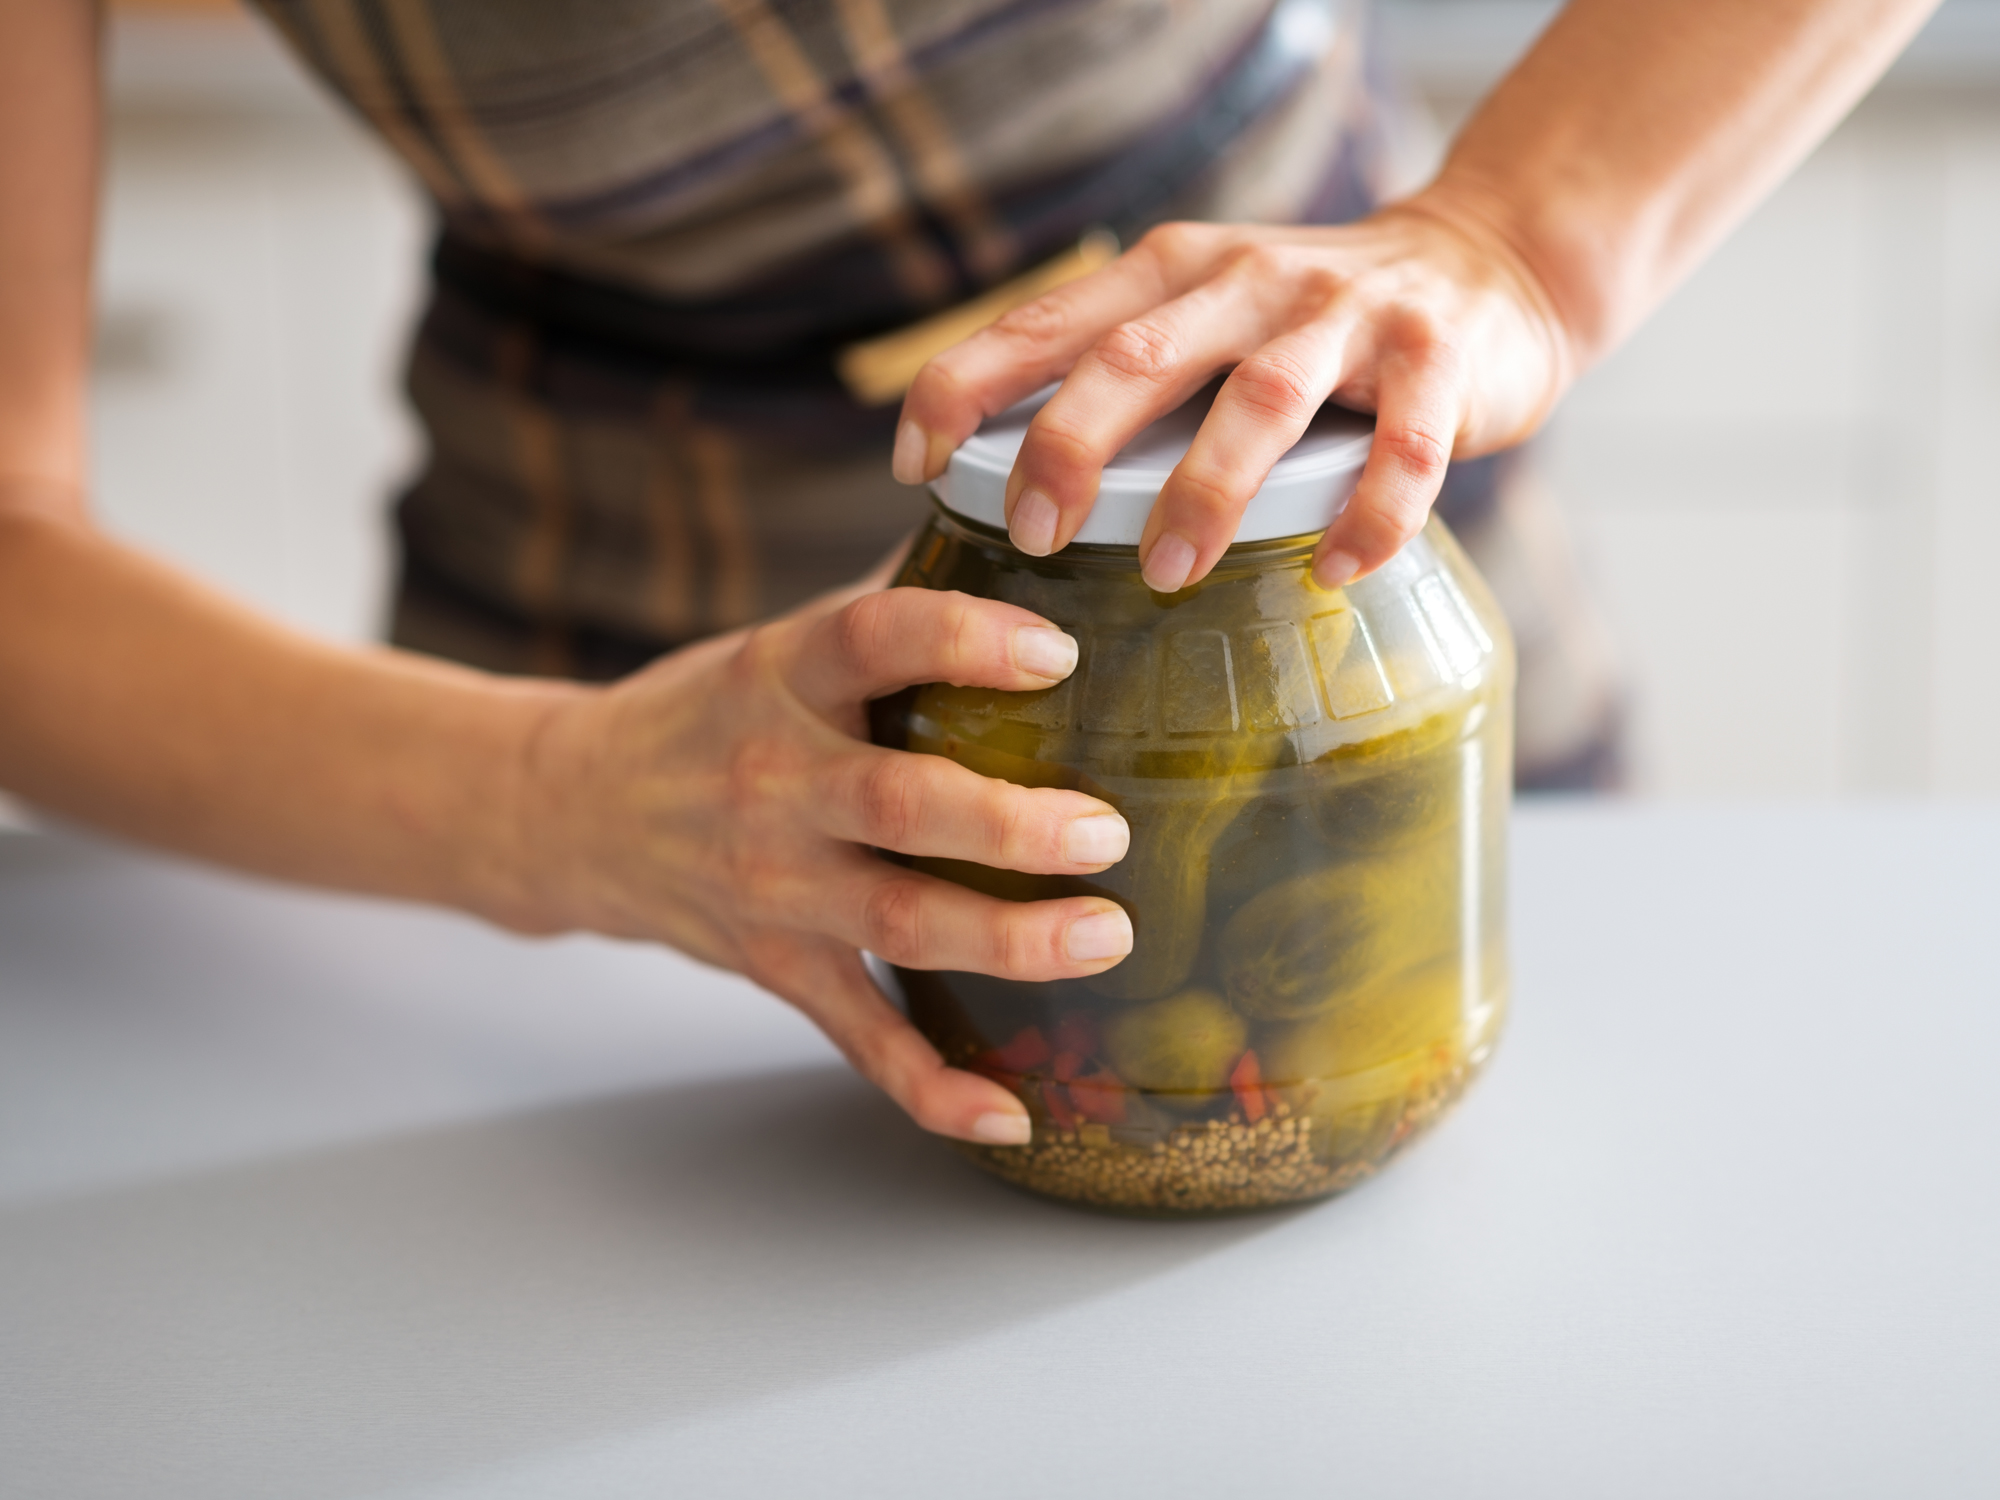 Grab a pickle jar and try this at-home longevity test